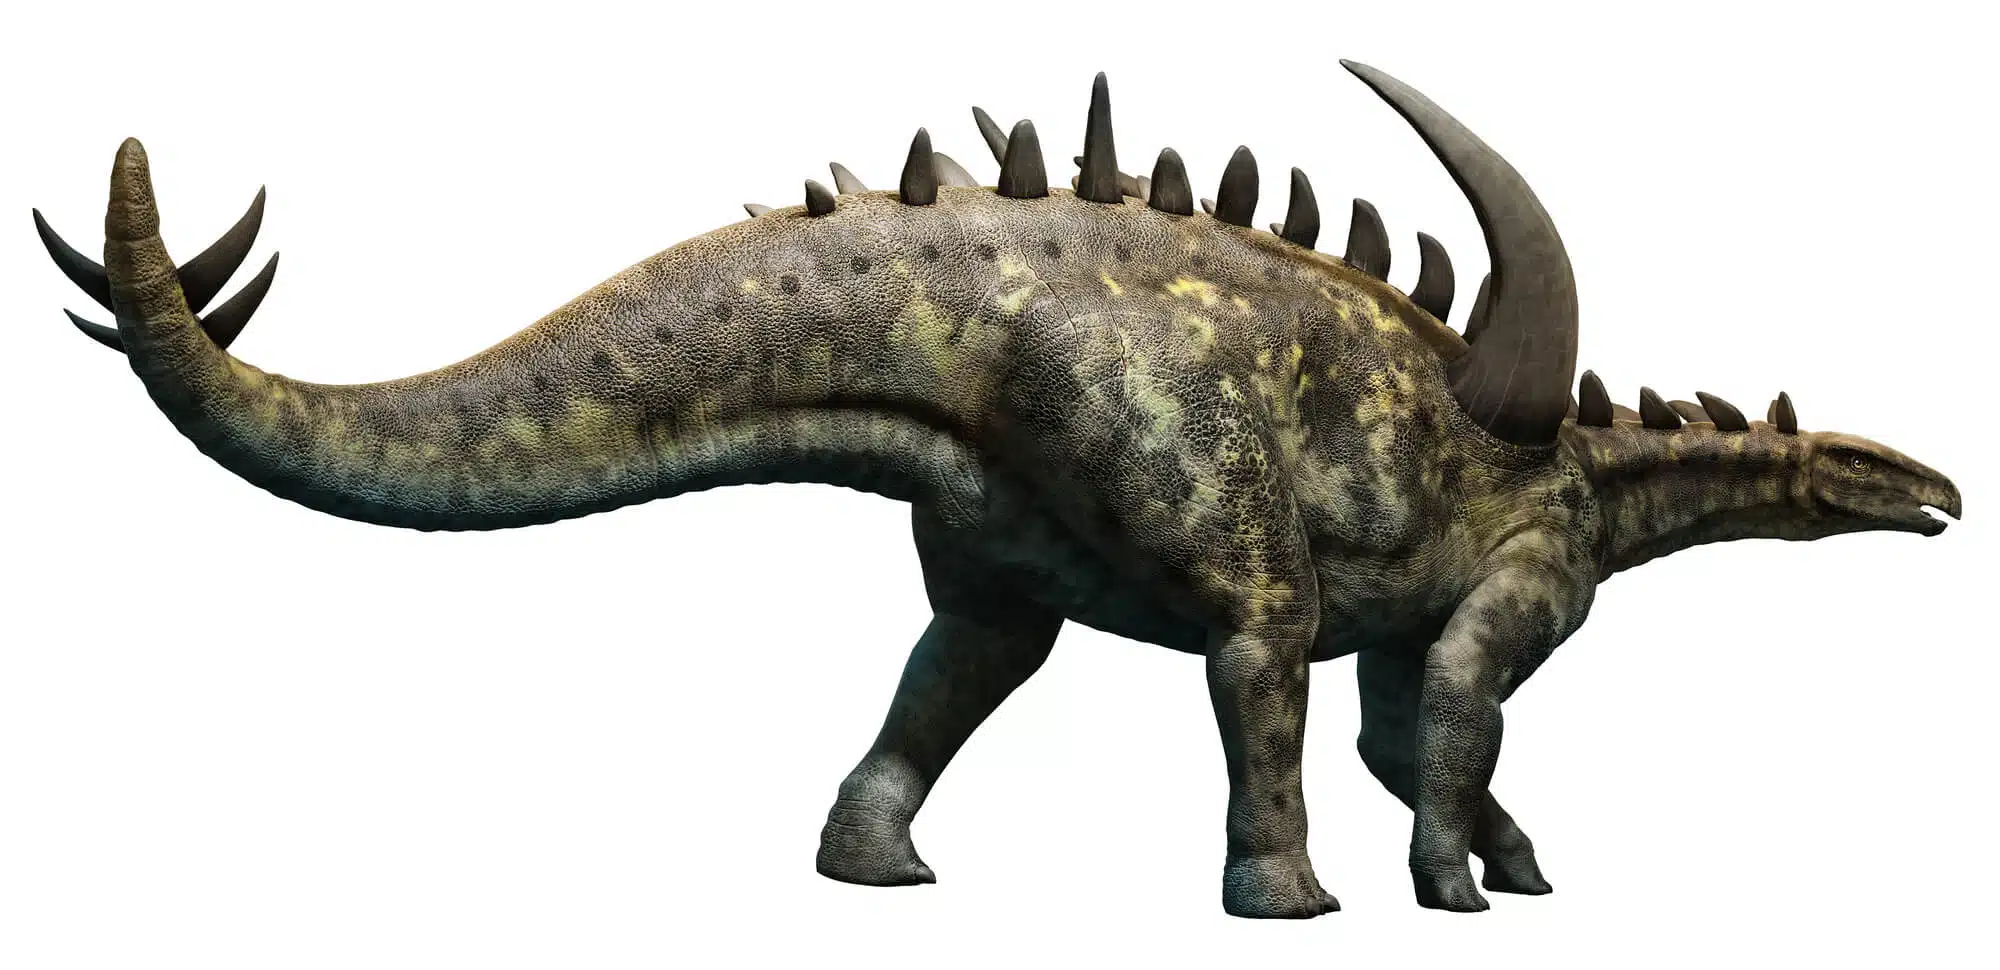 A vegetarian dinosaur from the Stegosaurus group. On his back were a series of rigid surfaces that apparently absorbed sunlight, but gradually began to be used for fighting and defense as well. Image: depositphotos.com